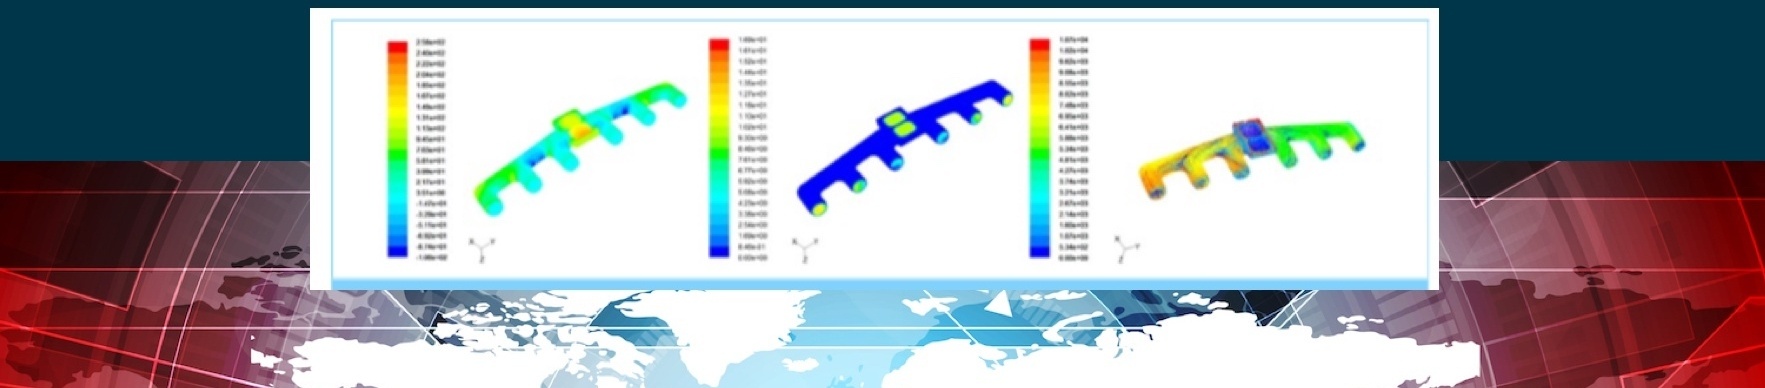 ANSYS FLUENT in the cloud